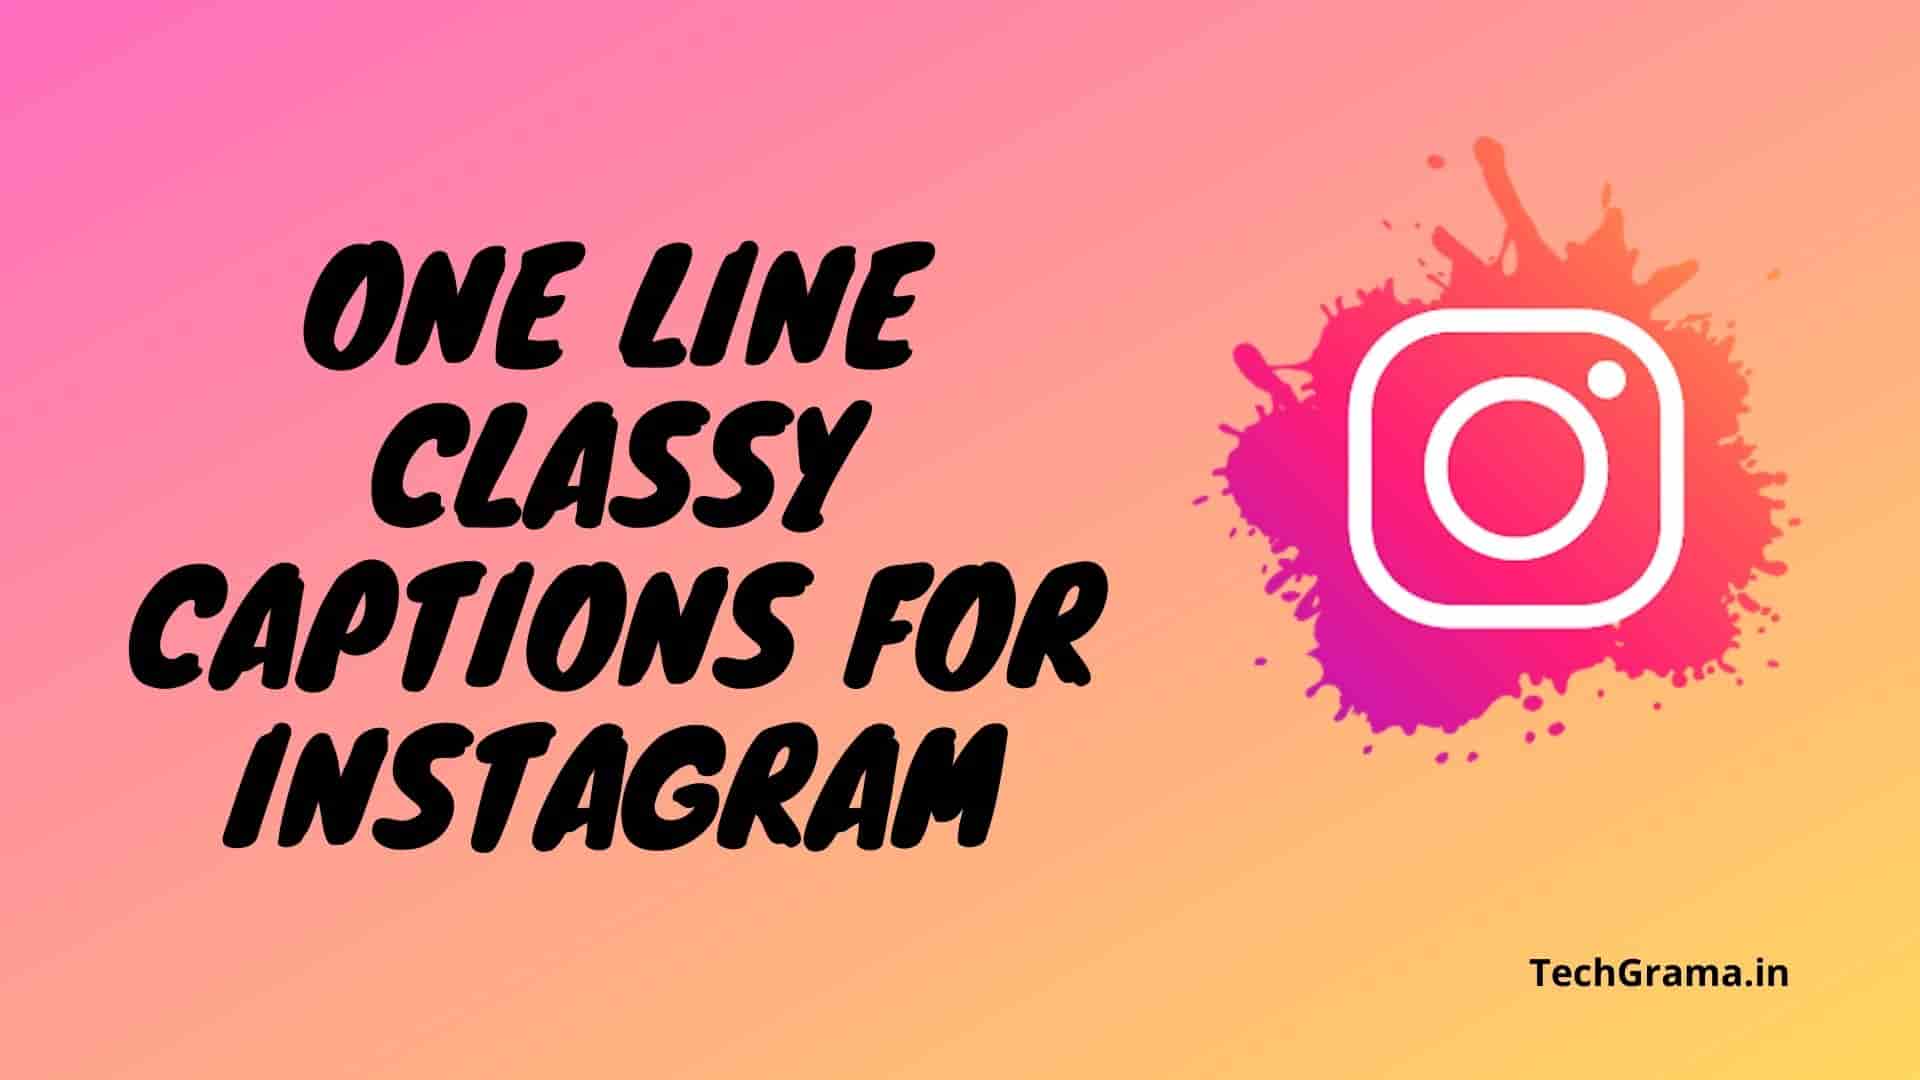 Best Classy Captions For Instagram Photos and Selfies, classy captions for instagram, classy captions for instagram for boy, classy captions for instagram for girl, classy captions for instagram post, short classy captions for instagram, classy captions for instagram pictures, classy captions for instagram in hindi, classy captions for instagram selfies, cute classy captions for instagram, sassy and classy captions for instagram, savage classy captions for instagram, one line classy captions for instagram, simple and classy captions for instagram, one word classy captions for instagram, attitude and classy captions for instagram, classy instagram captions for guys, classy quotes for instagram post.